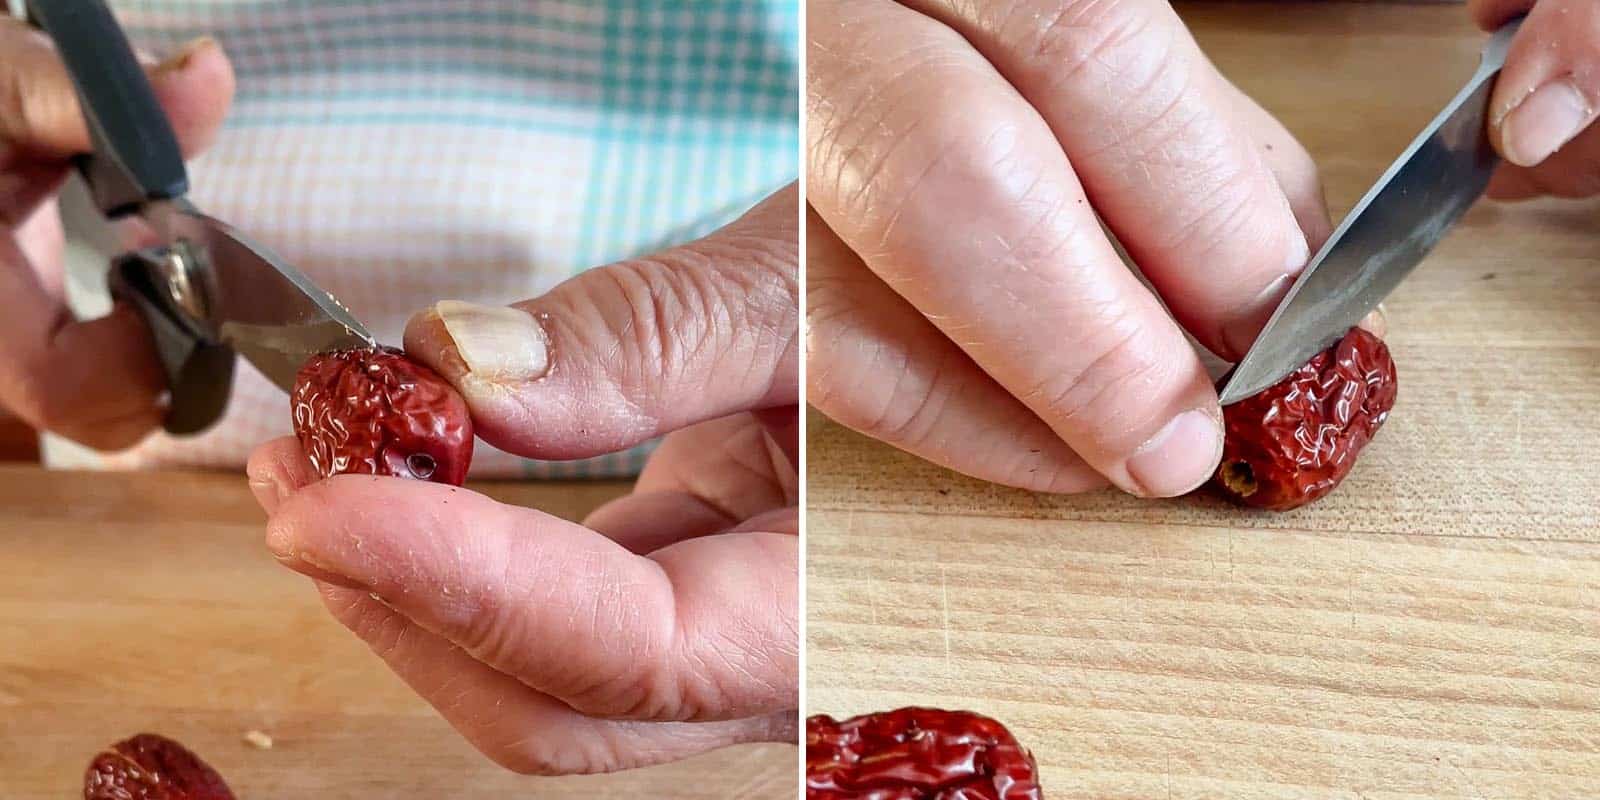 Cutting open red dates with scissors and knife